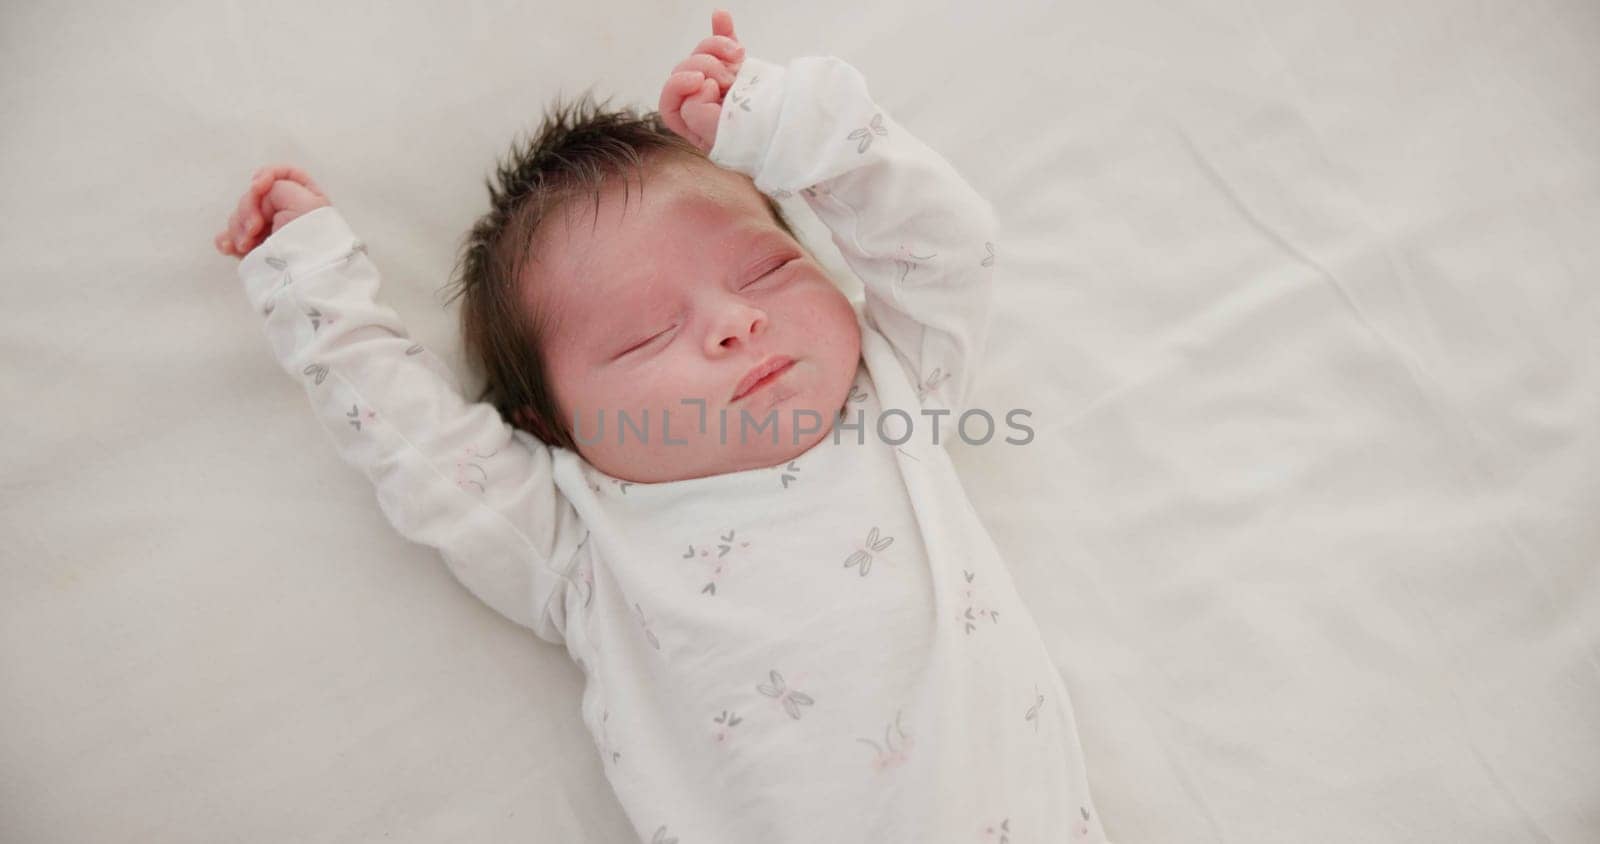 Newborn, face or sleeping with stretching on bed in nursery for relaxing or resting with child development. Baby, tired or dreaming in bedroom of house with calm, relax and cute infant in family home.